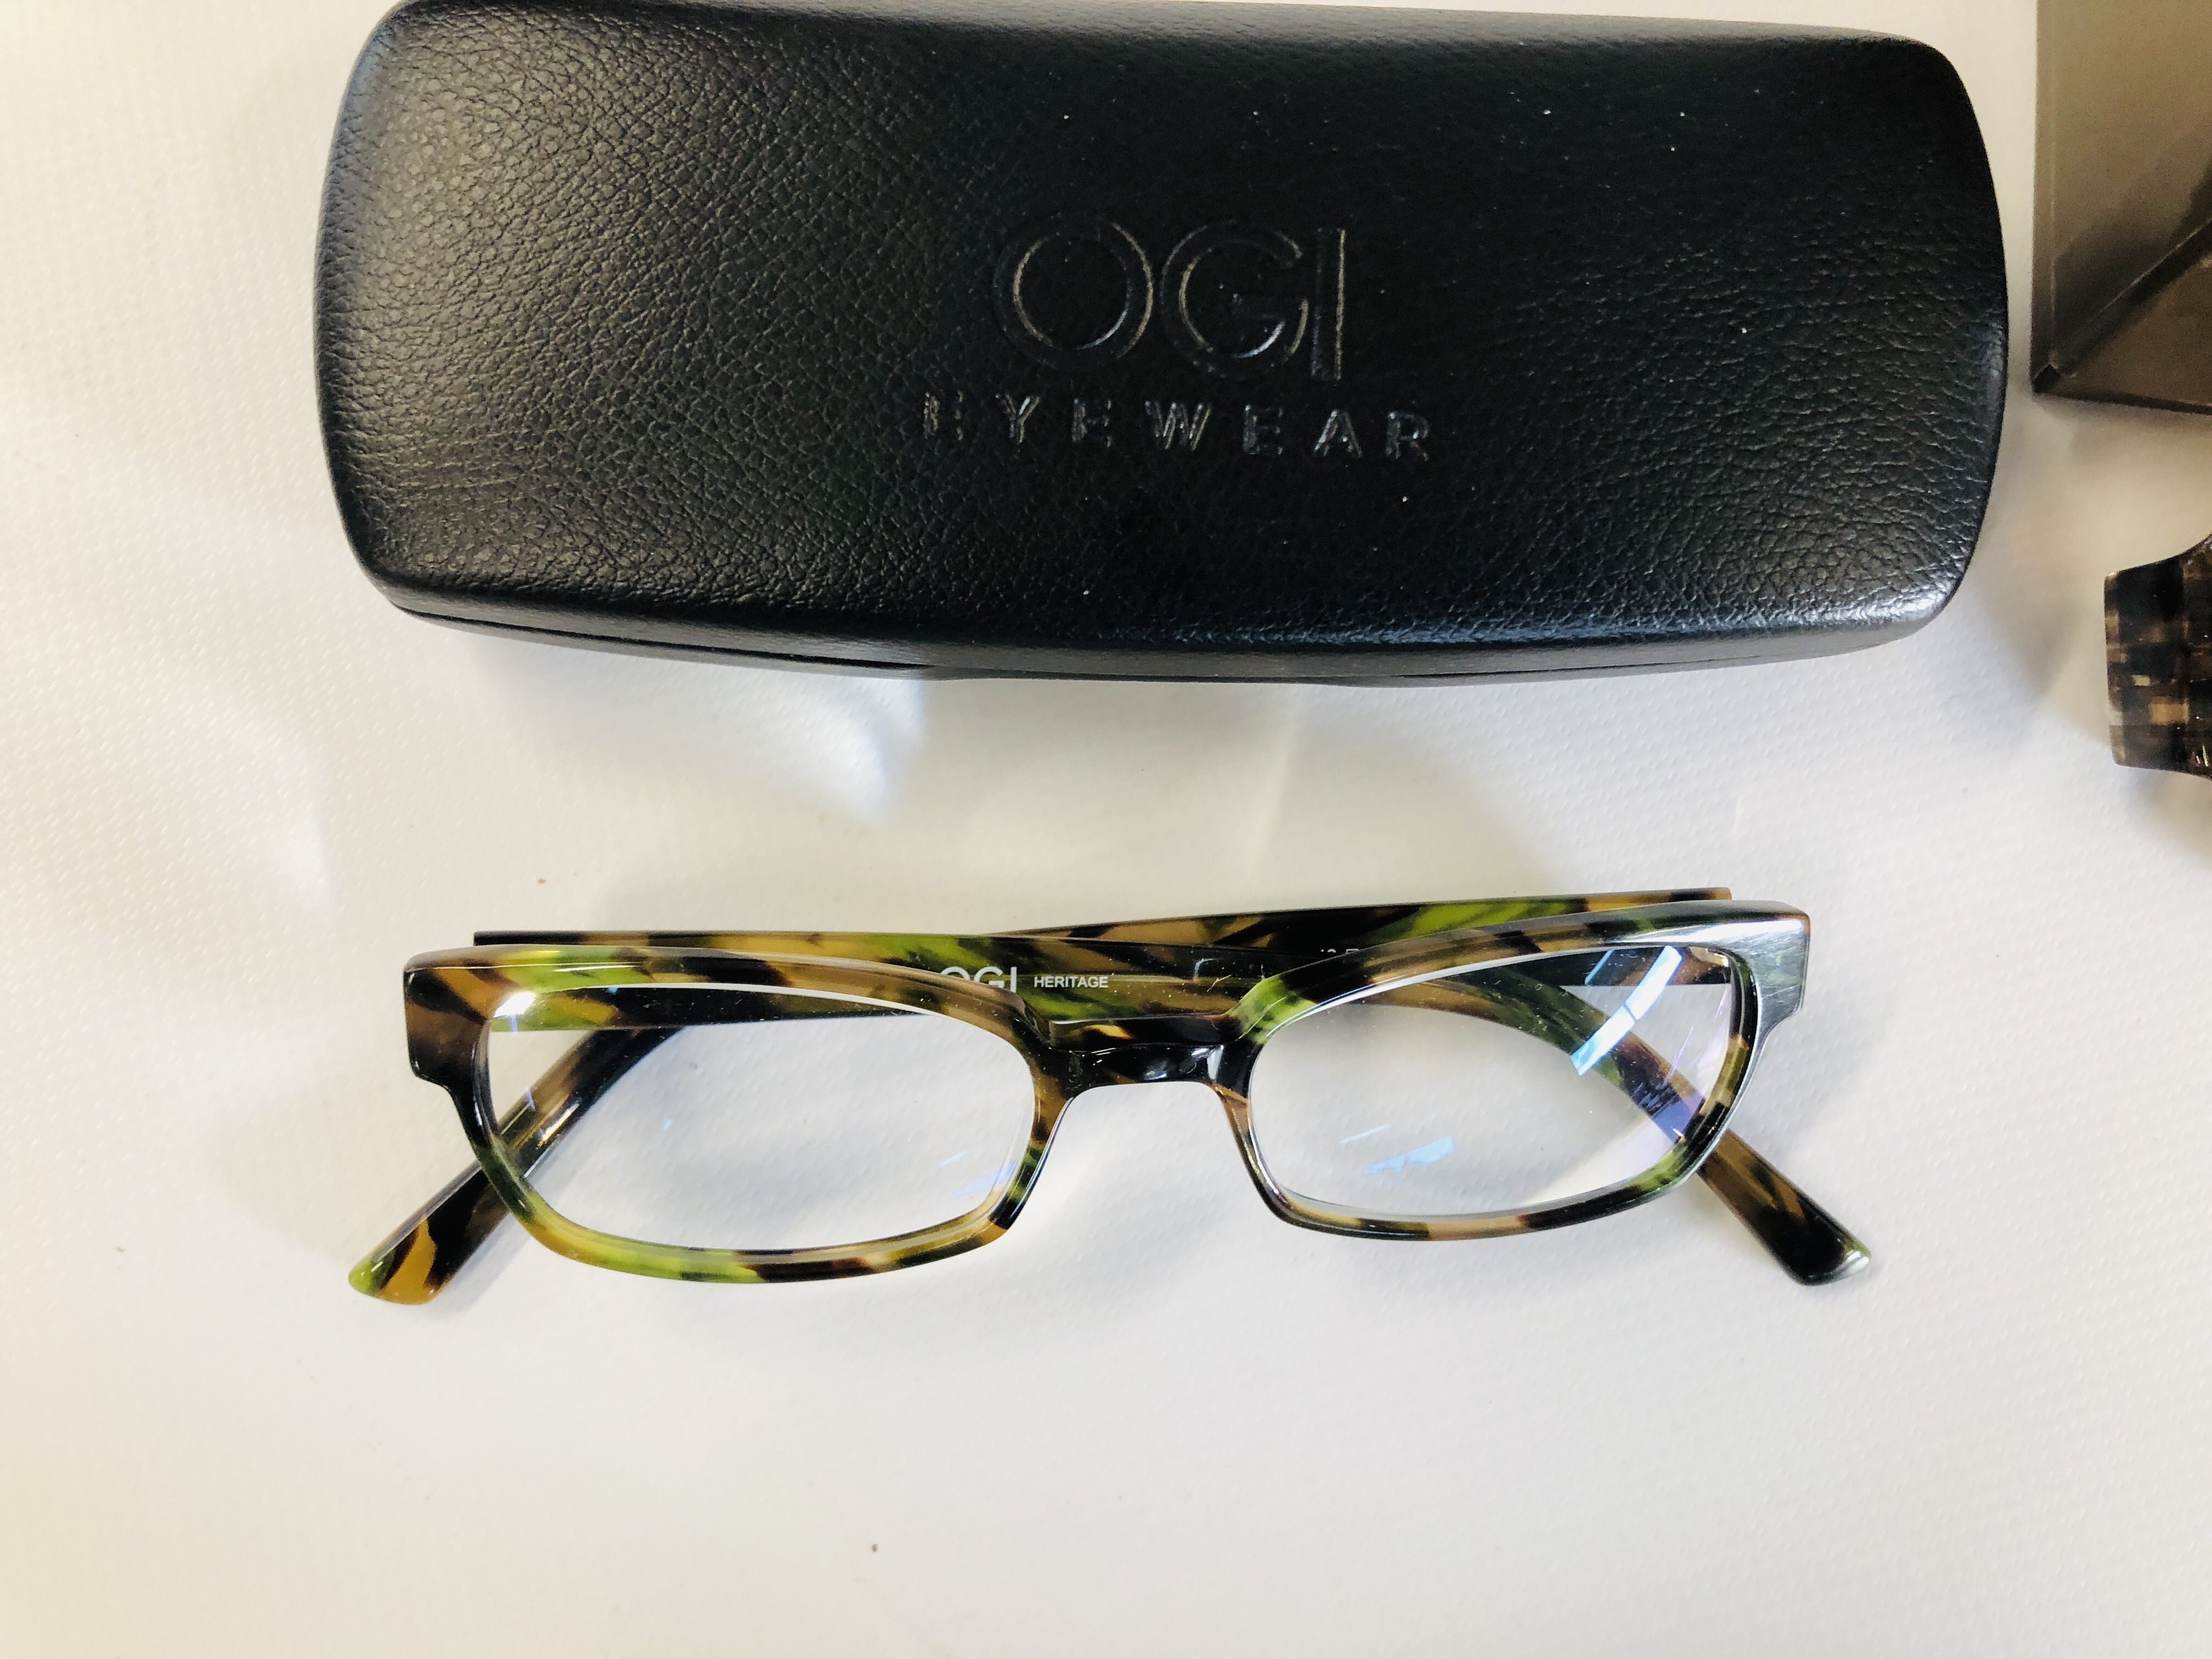 6 PAIRS OF DESIGNER FRAMED PRESCRIPTION READING GLASSES TO INCLUDE GUCCI, HUGO BOSS, SILHOUETTE. - Image 2 of 7